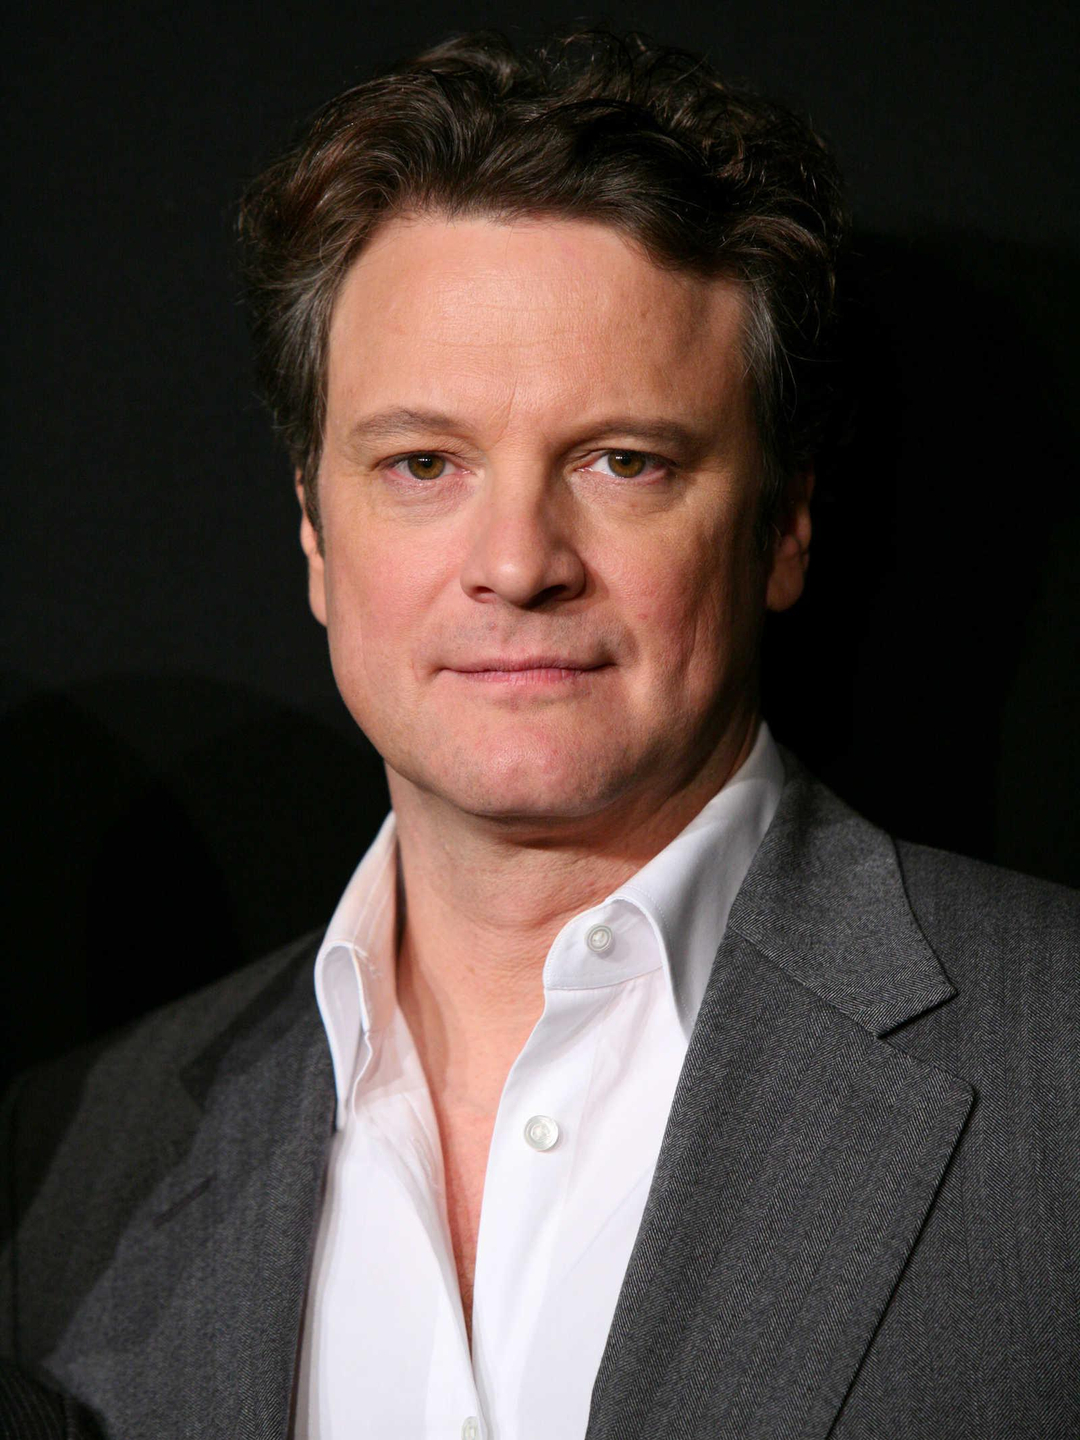 Colin Firth personal traits